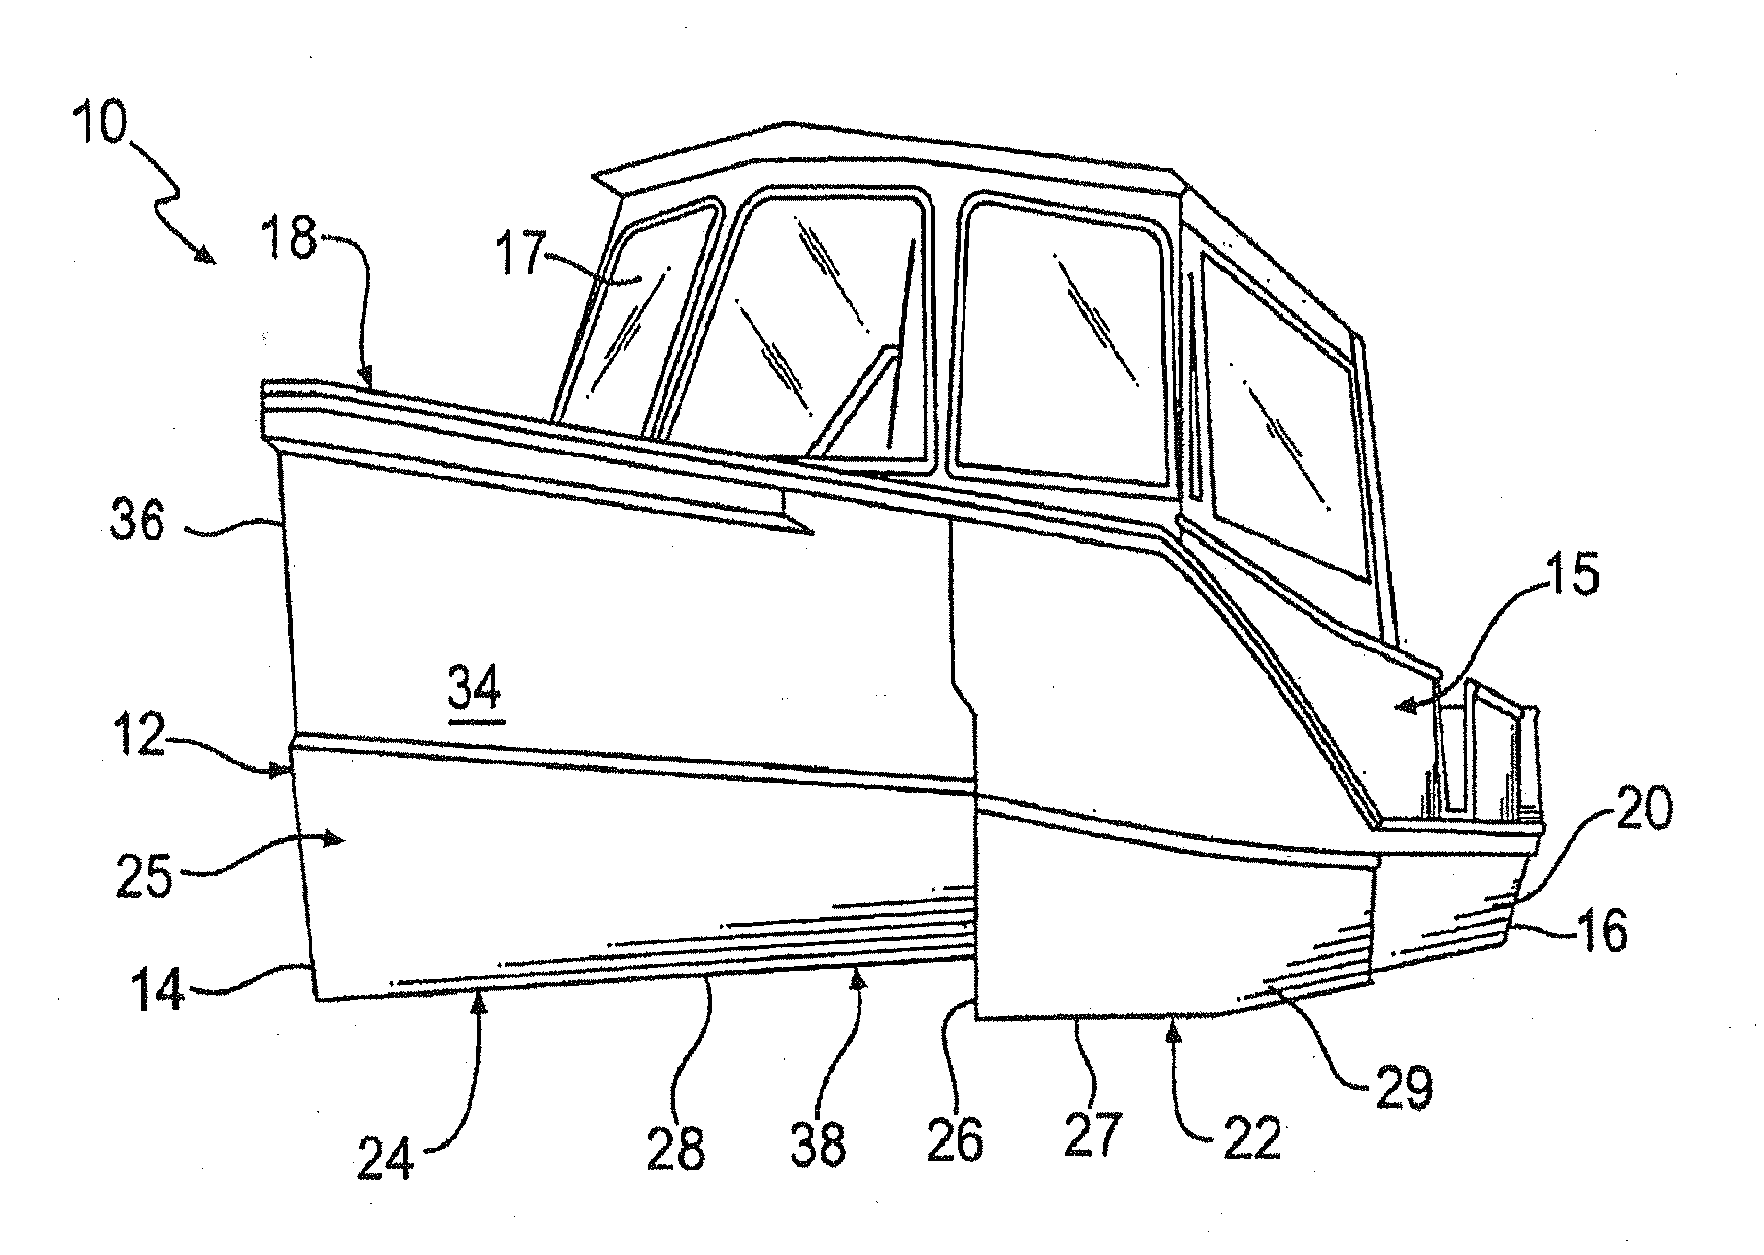 Watercraft with wave deflecting hull